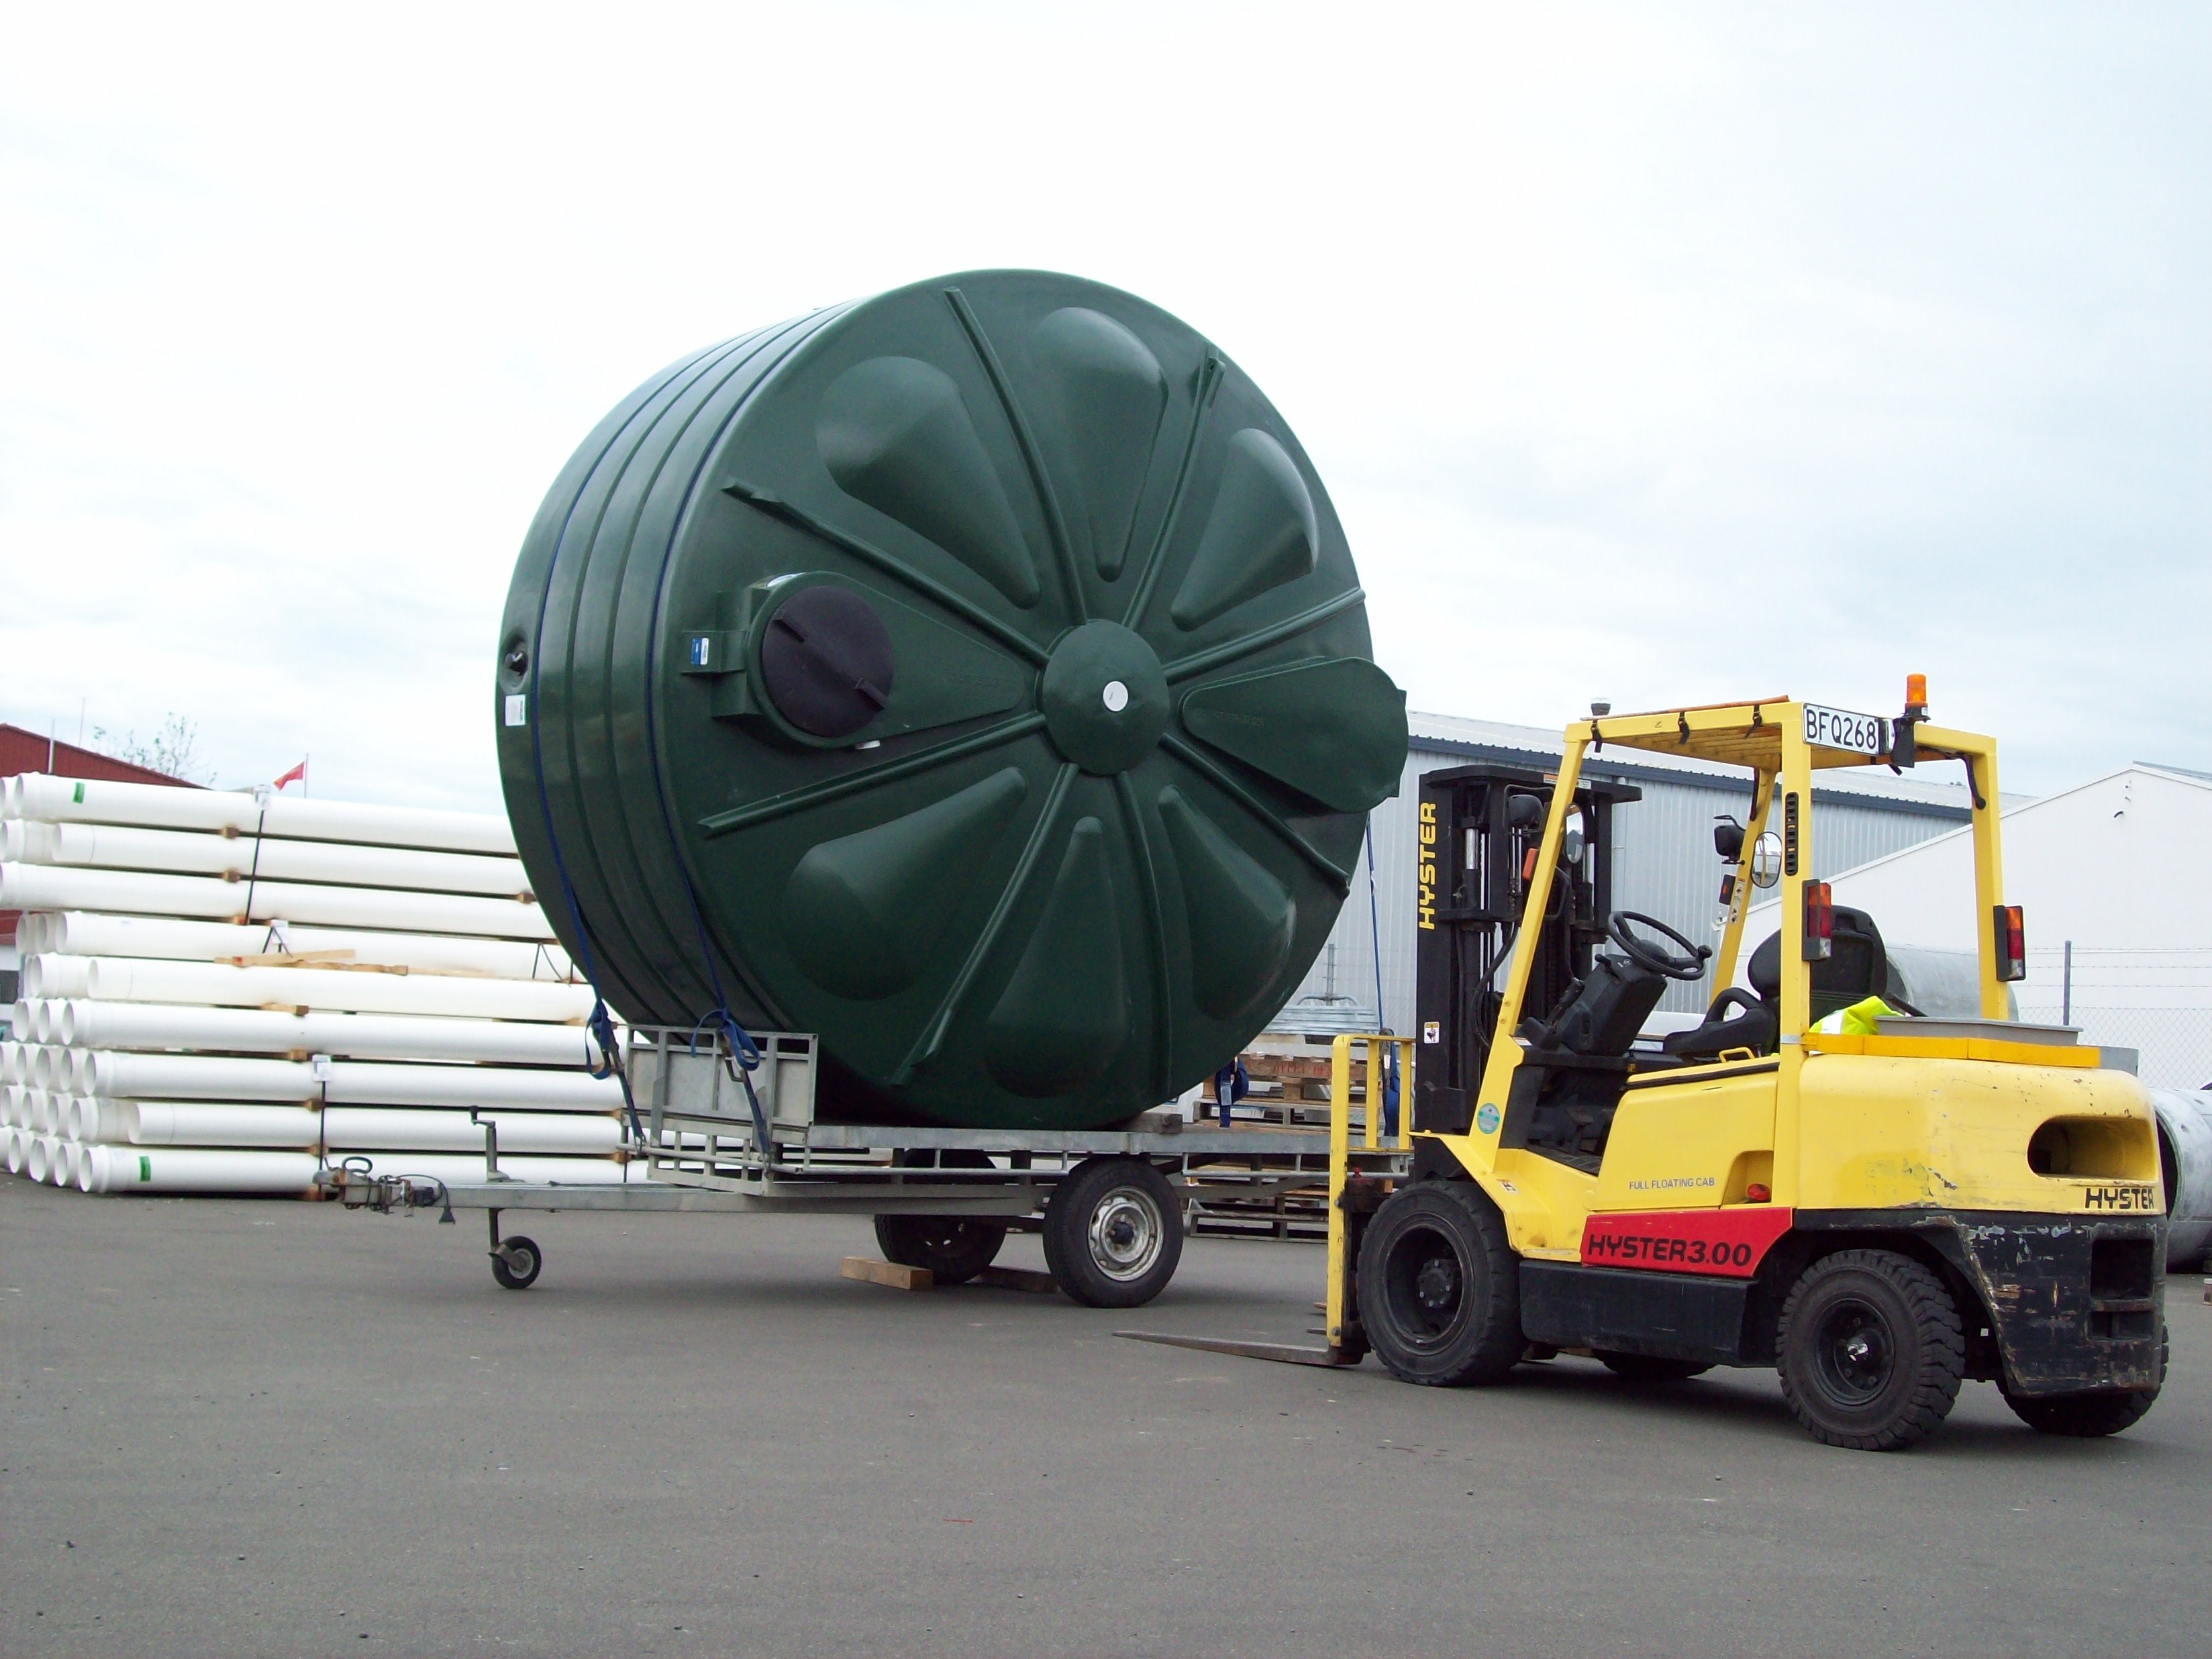 Loading a 15,000 ltr water tank for delivery to a customer